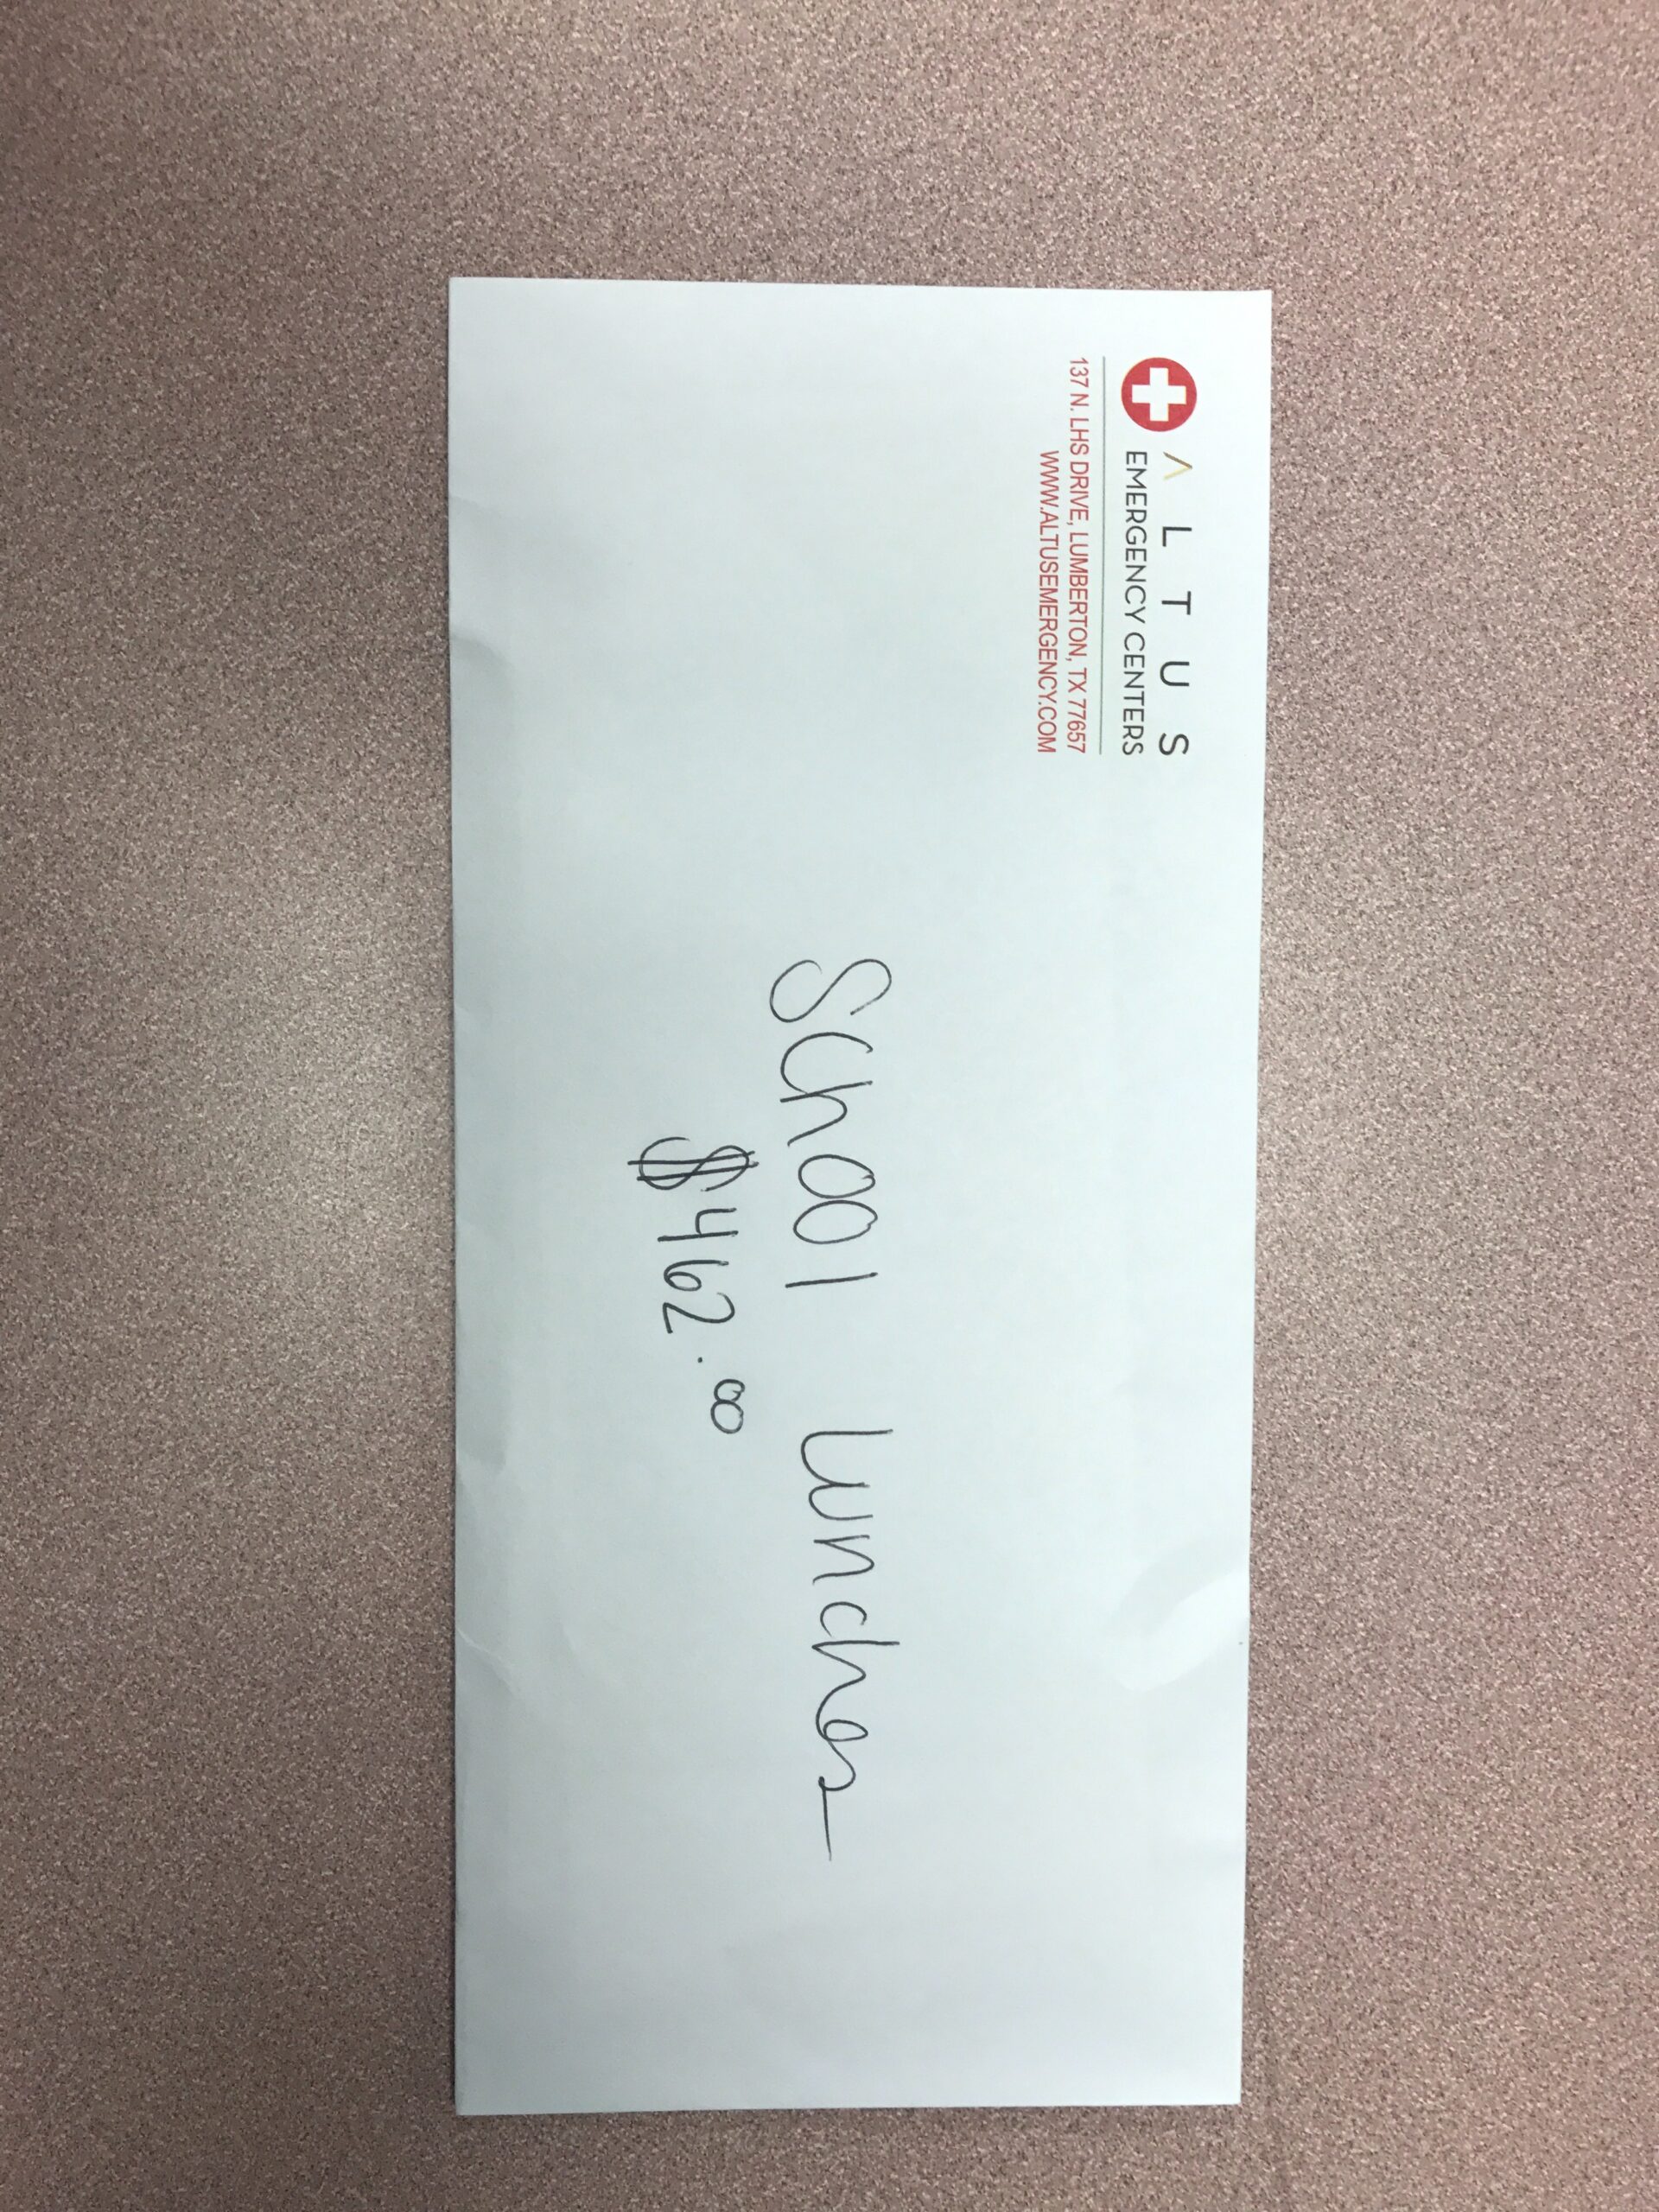 Altus Emergency School Lunches payment envelope